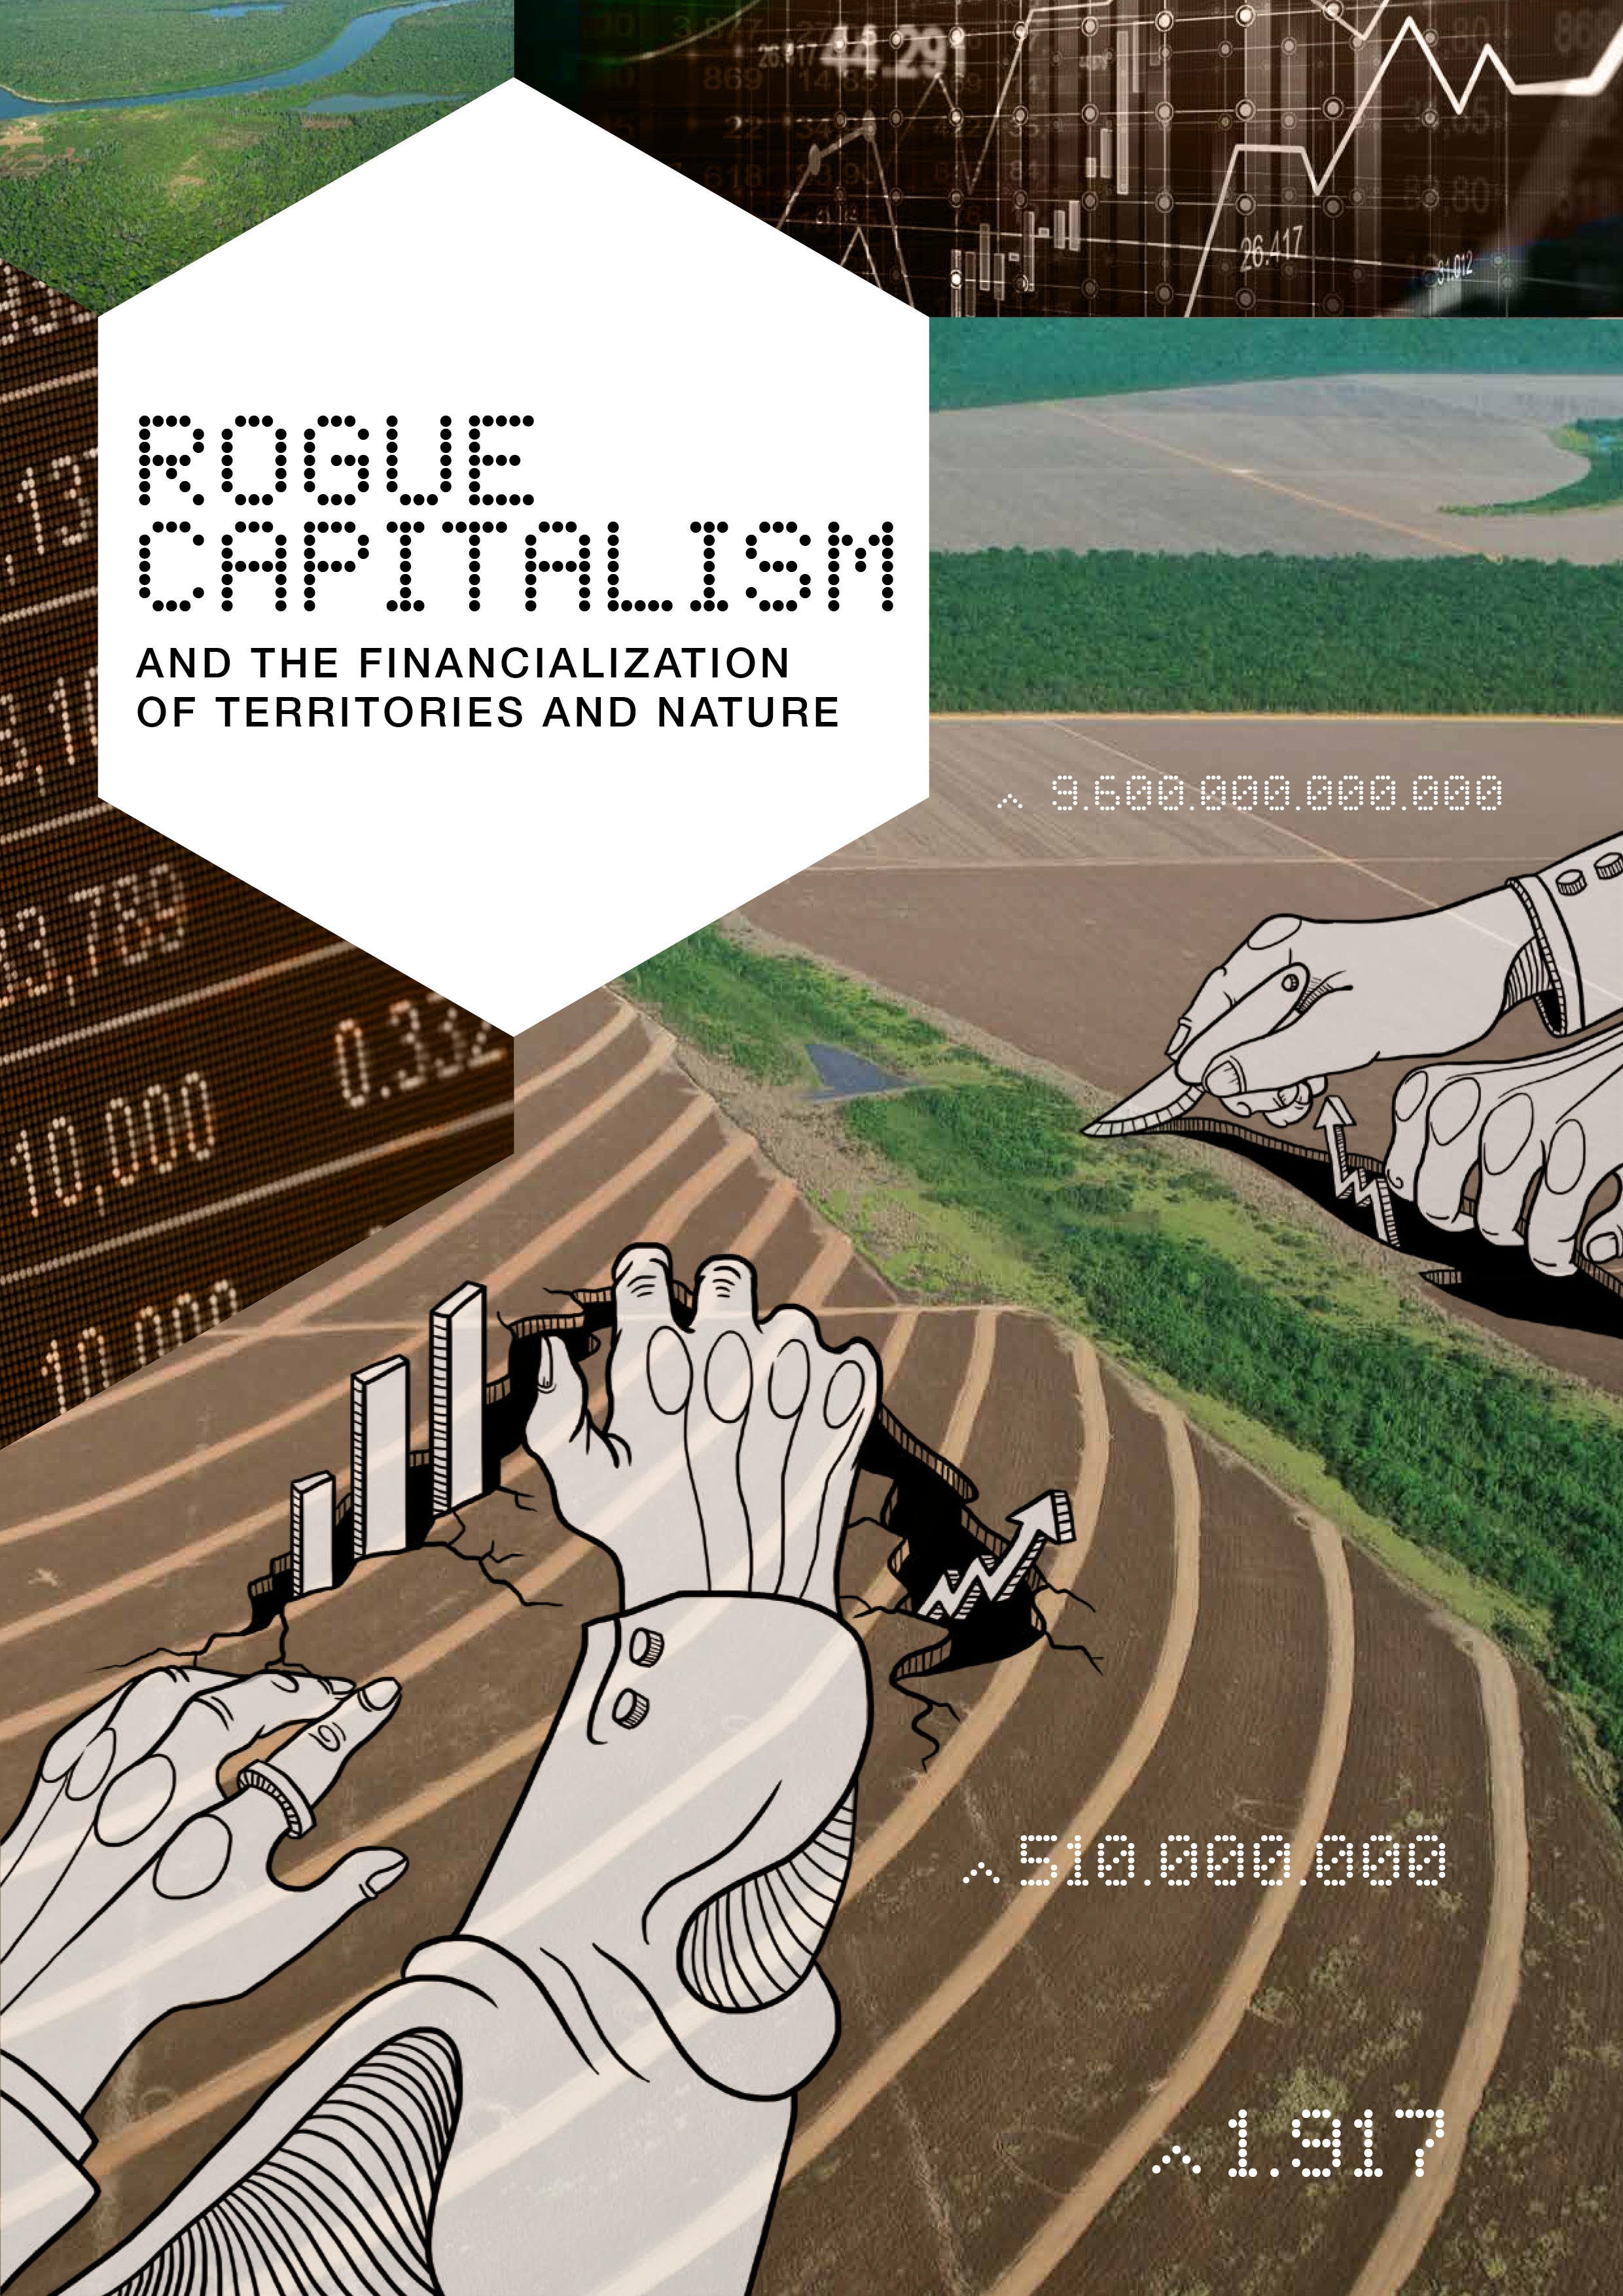 Rogue Capitalism and the financialization of territories and nature |  Transnational Institute